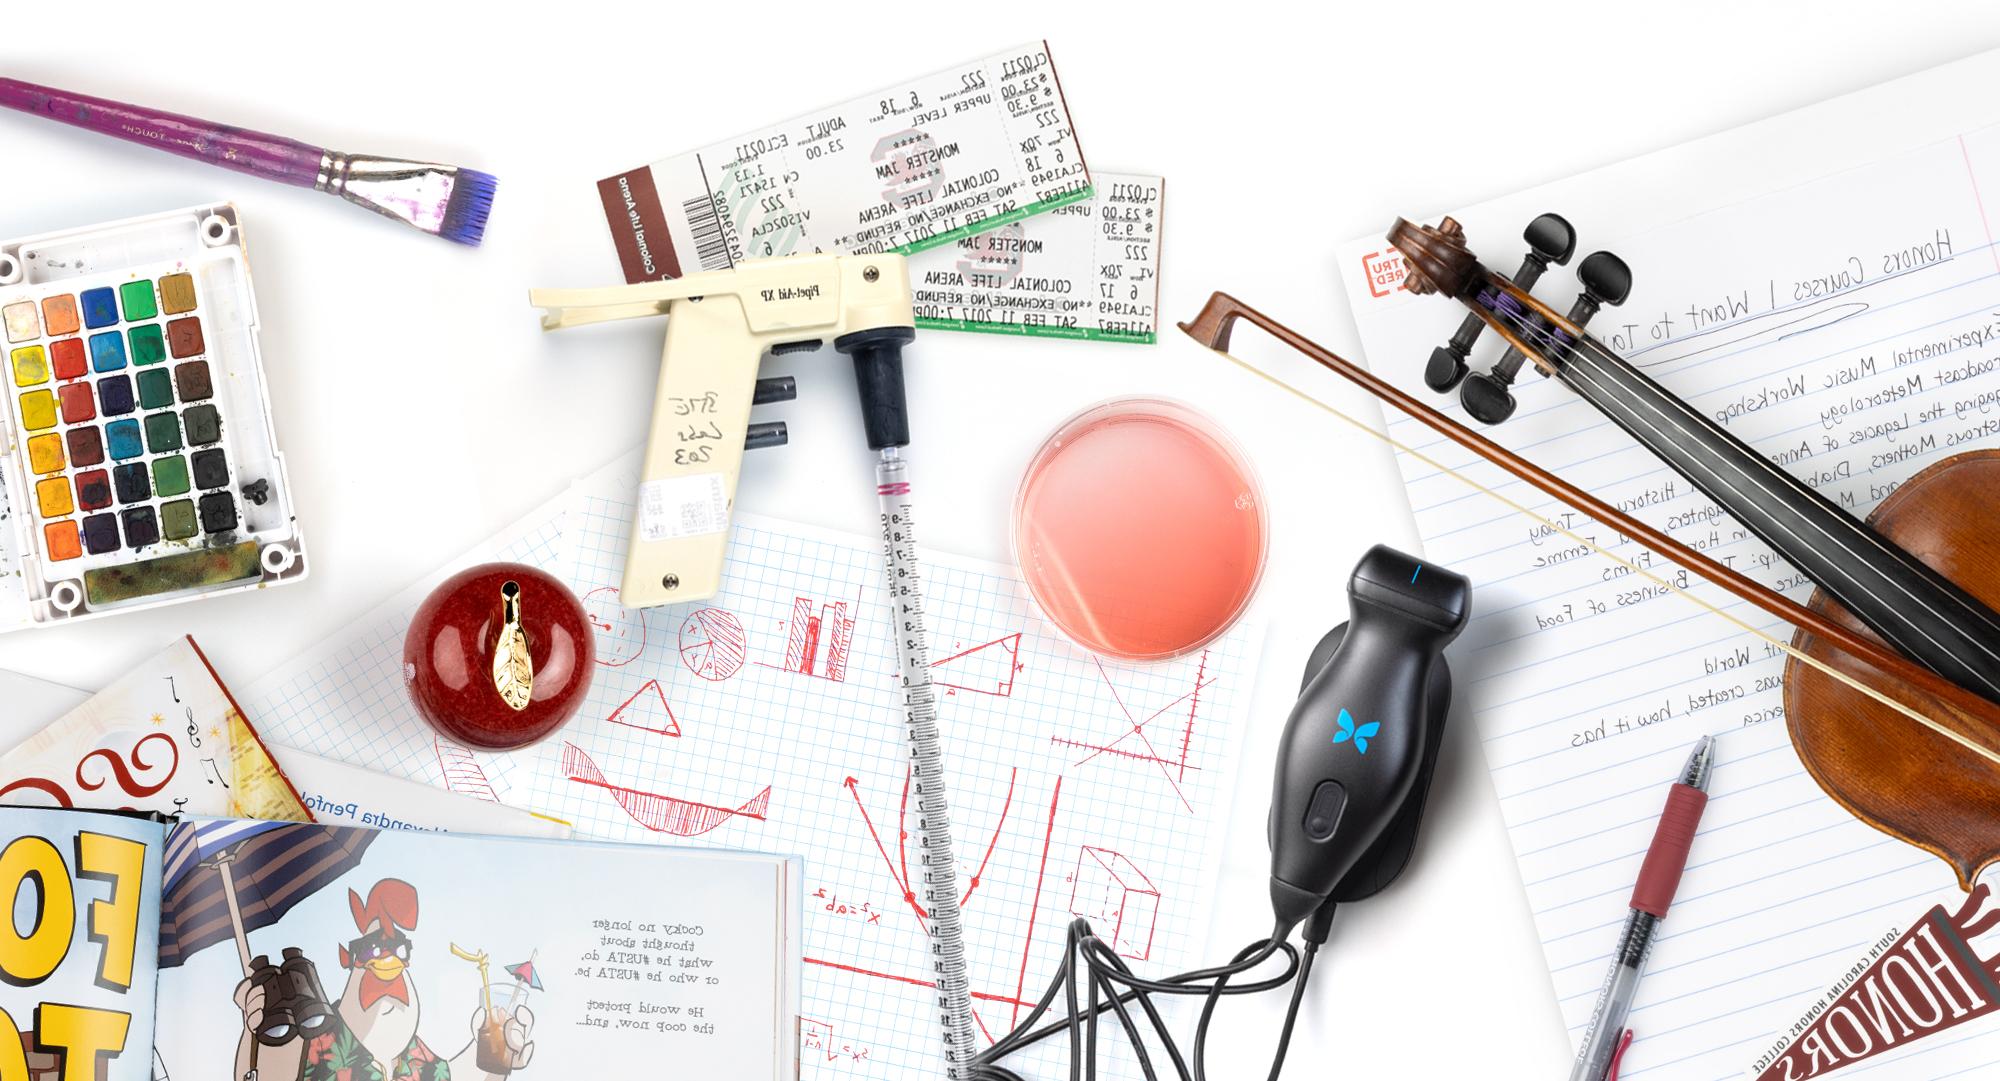 A collection of items, including a violin, movie tickets, writing utensils, and drawings on graph paper, that represent the colleges at the university.